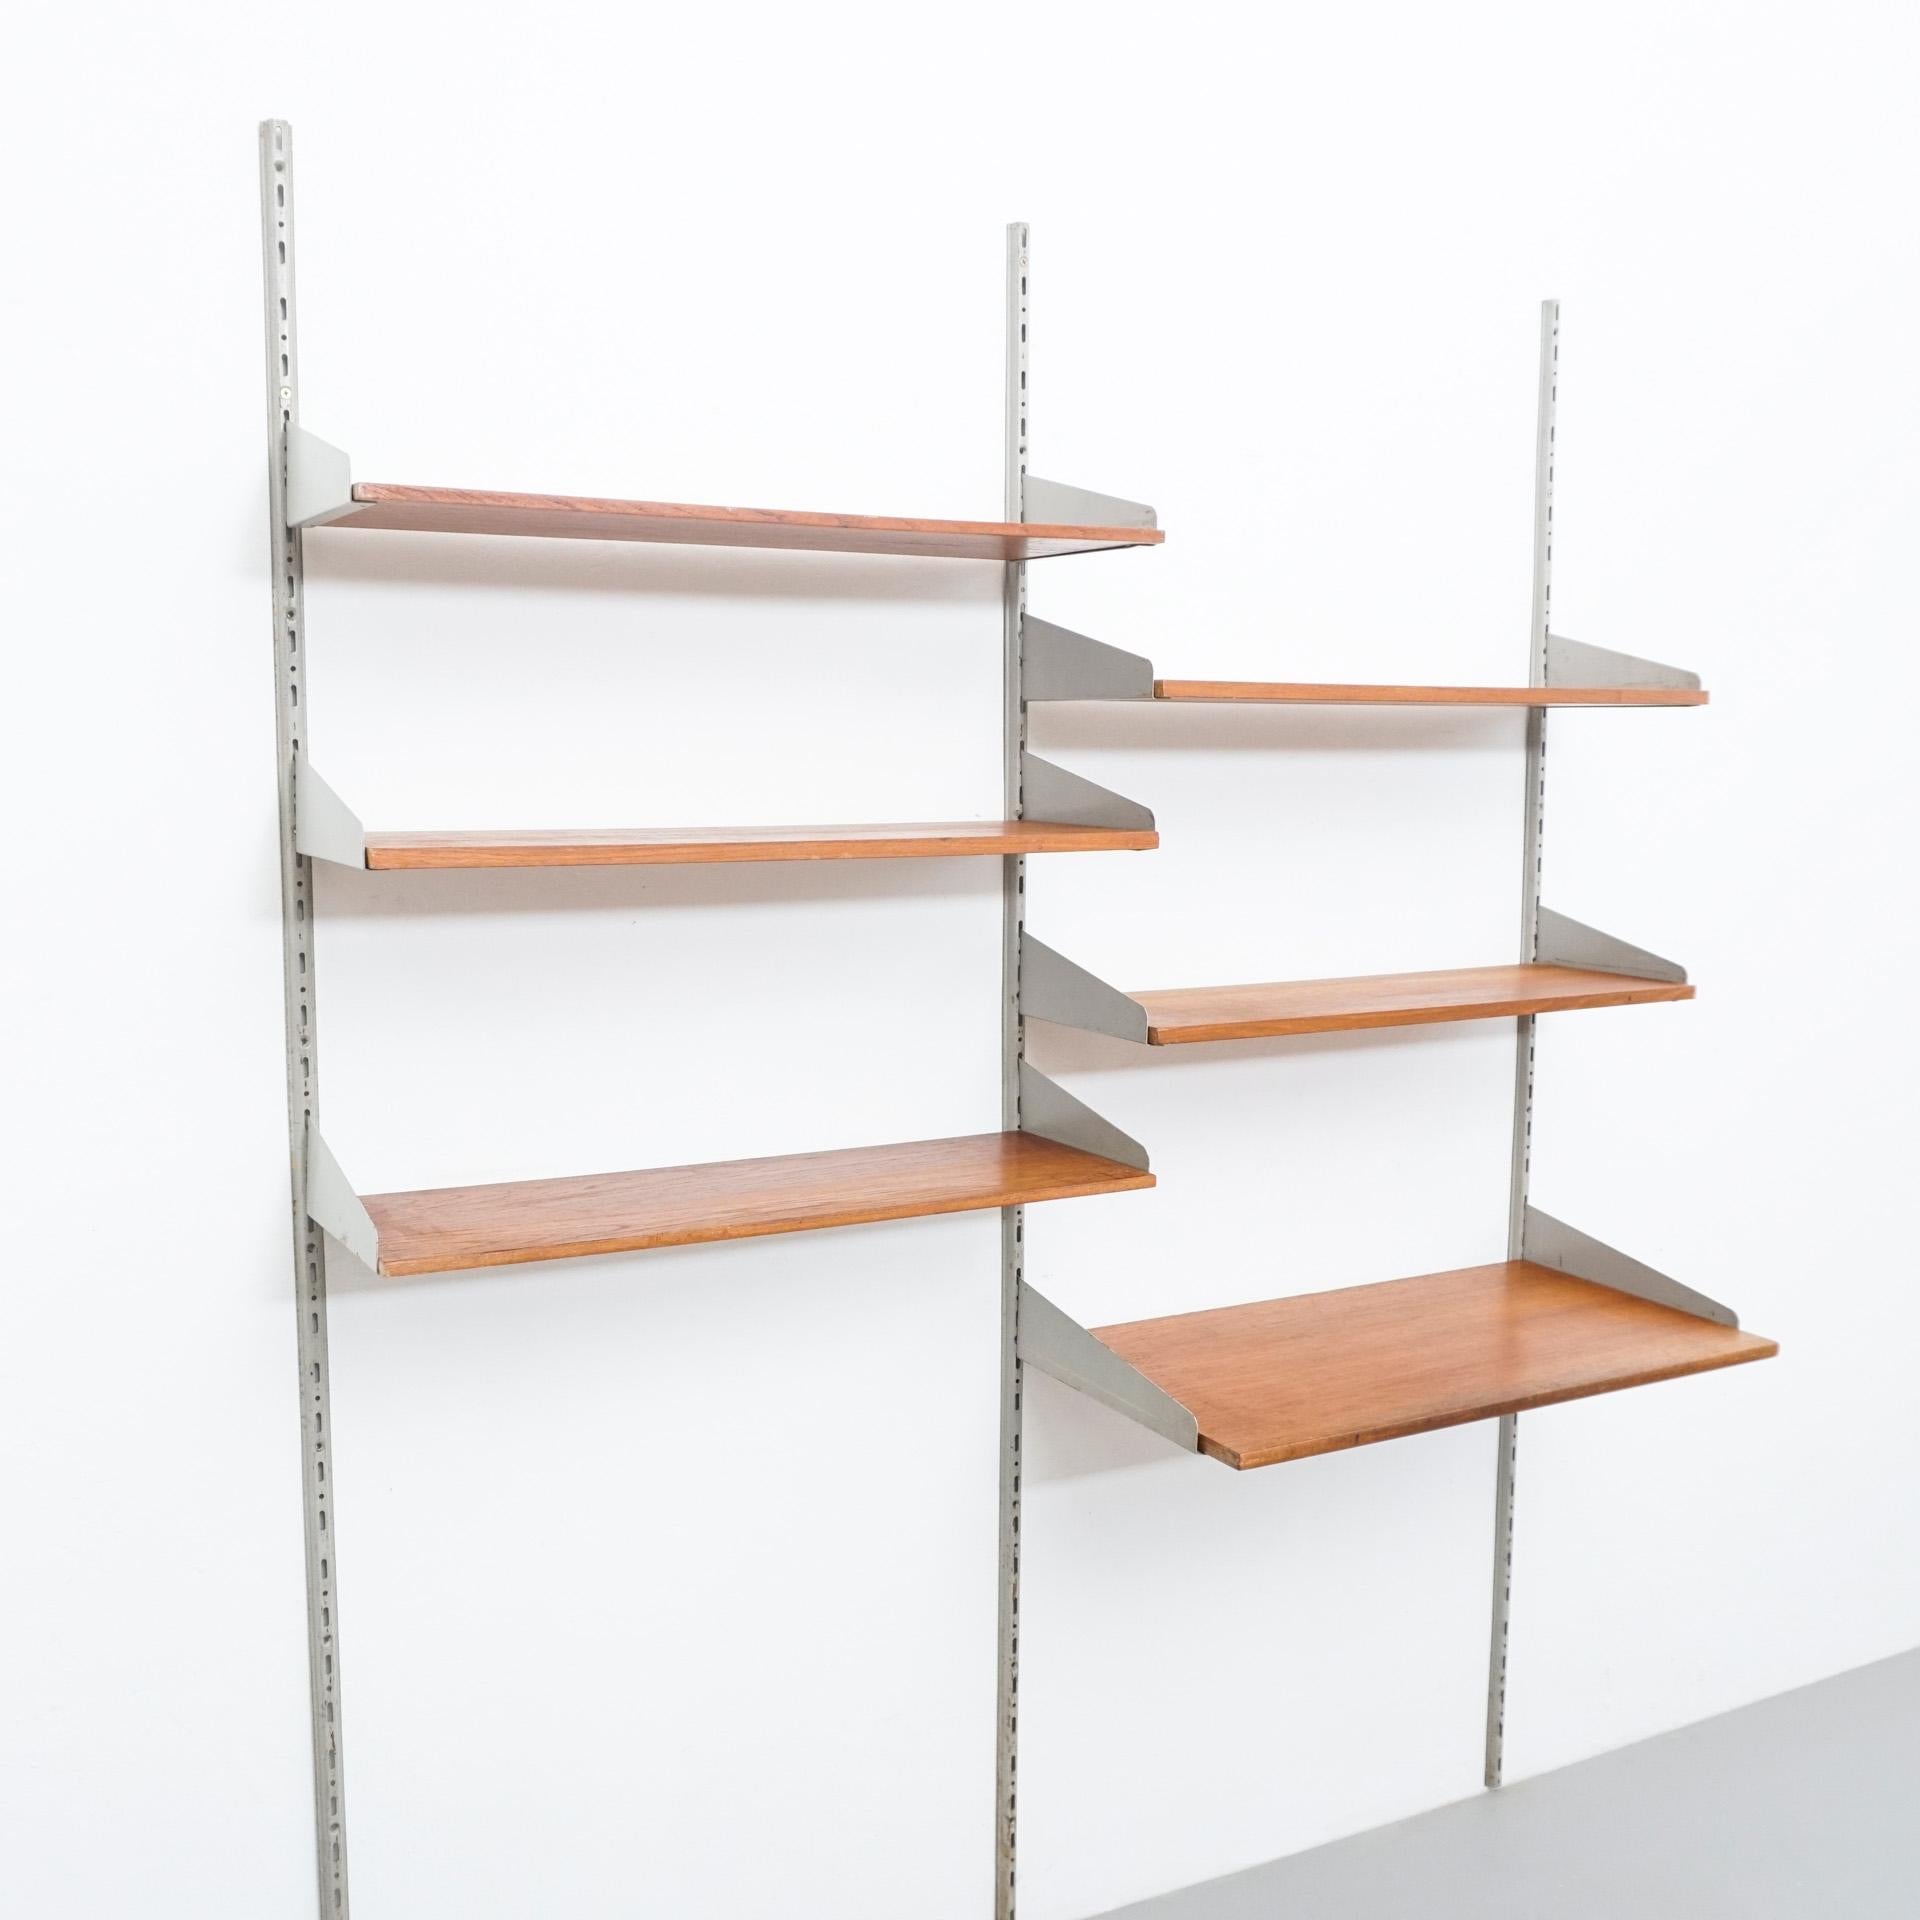 Modular shelve in Mid-Century Modern style by unknown manufacturer.

In good condition, preserving a beautiful patina, with minor wear consistent with age and use.

Materials:
Wood
Metal

Dimensions:
D 41 cm x W 163 cm x H 200 cm.